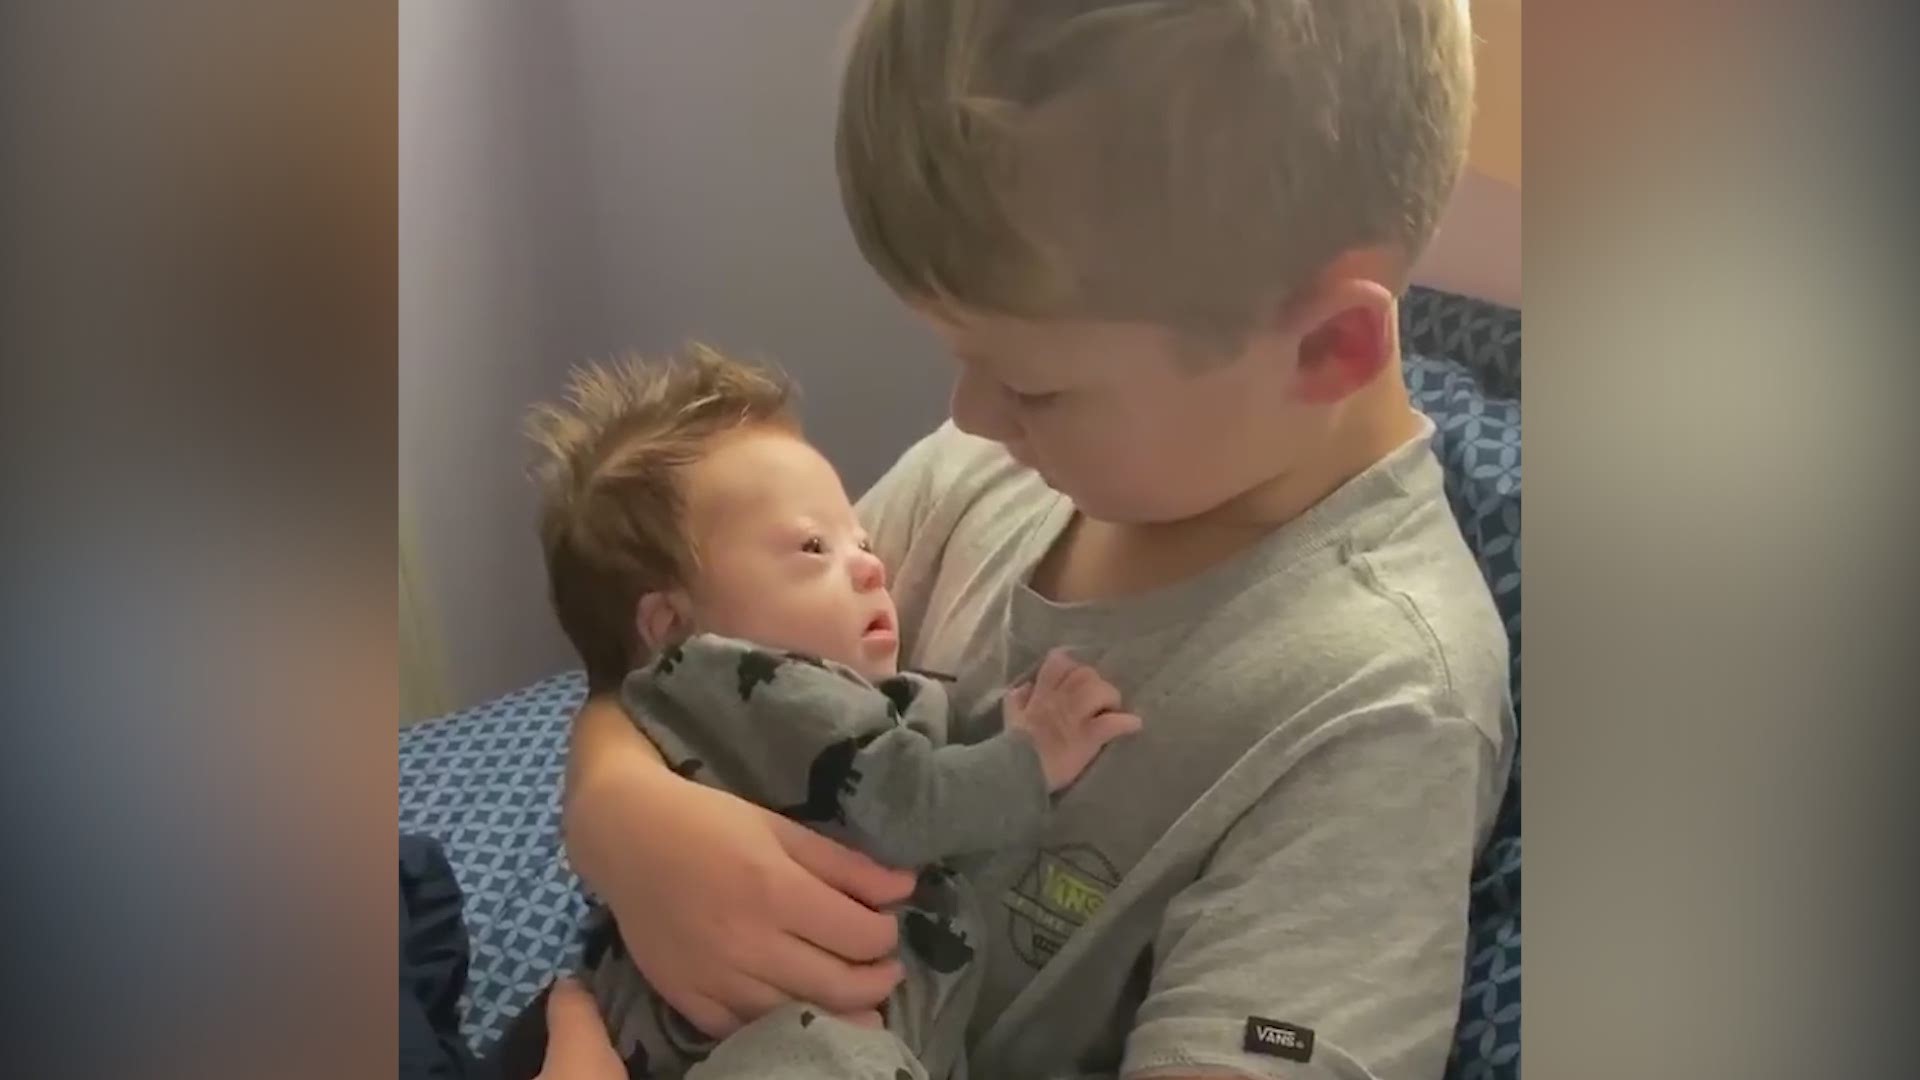 Nicole Powell, from Cabot, Arkansas, shared this video on her social media about one of her sons singing to his youngest child who has Down Syndrome.